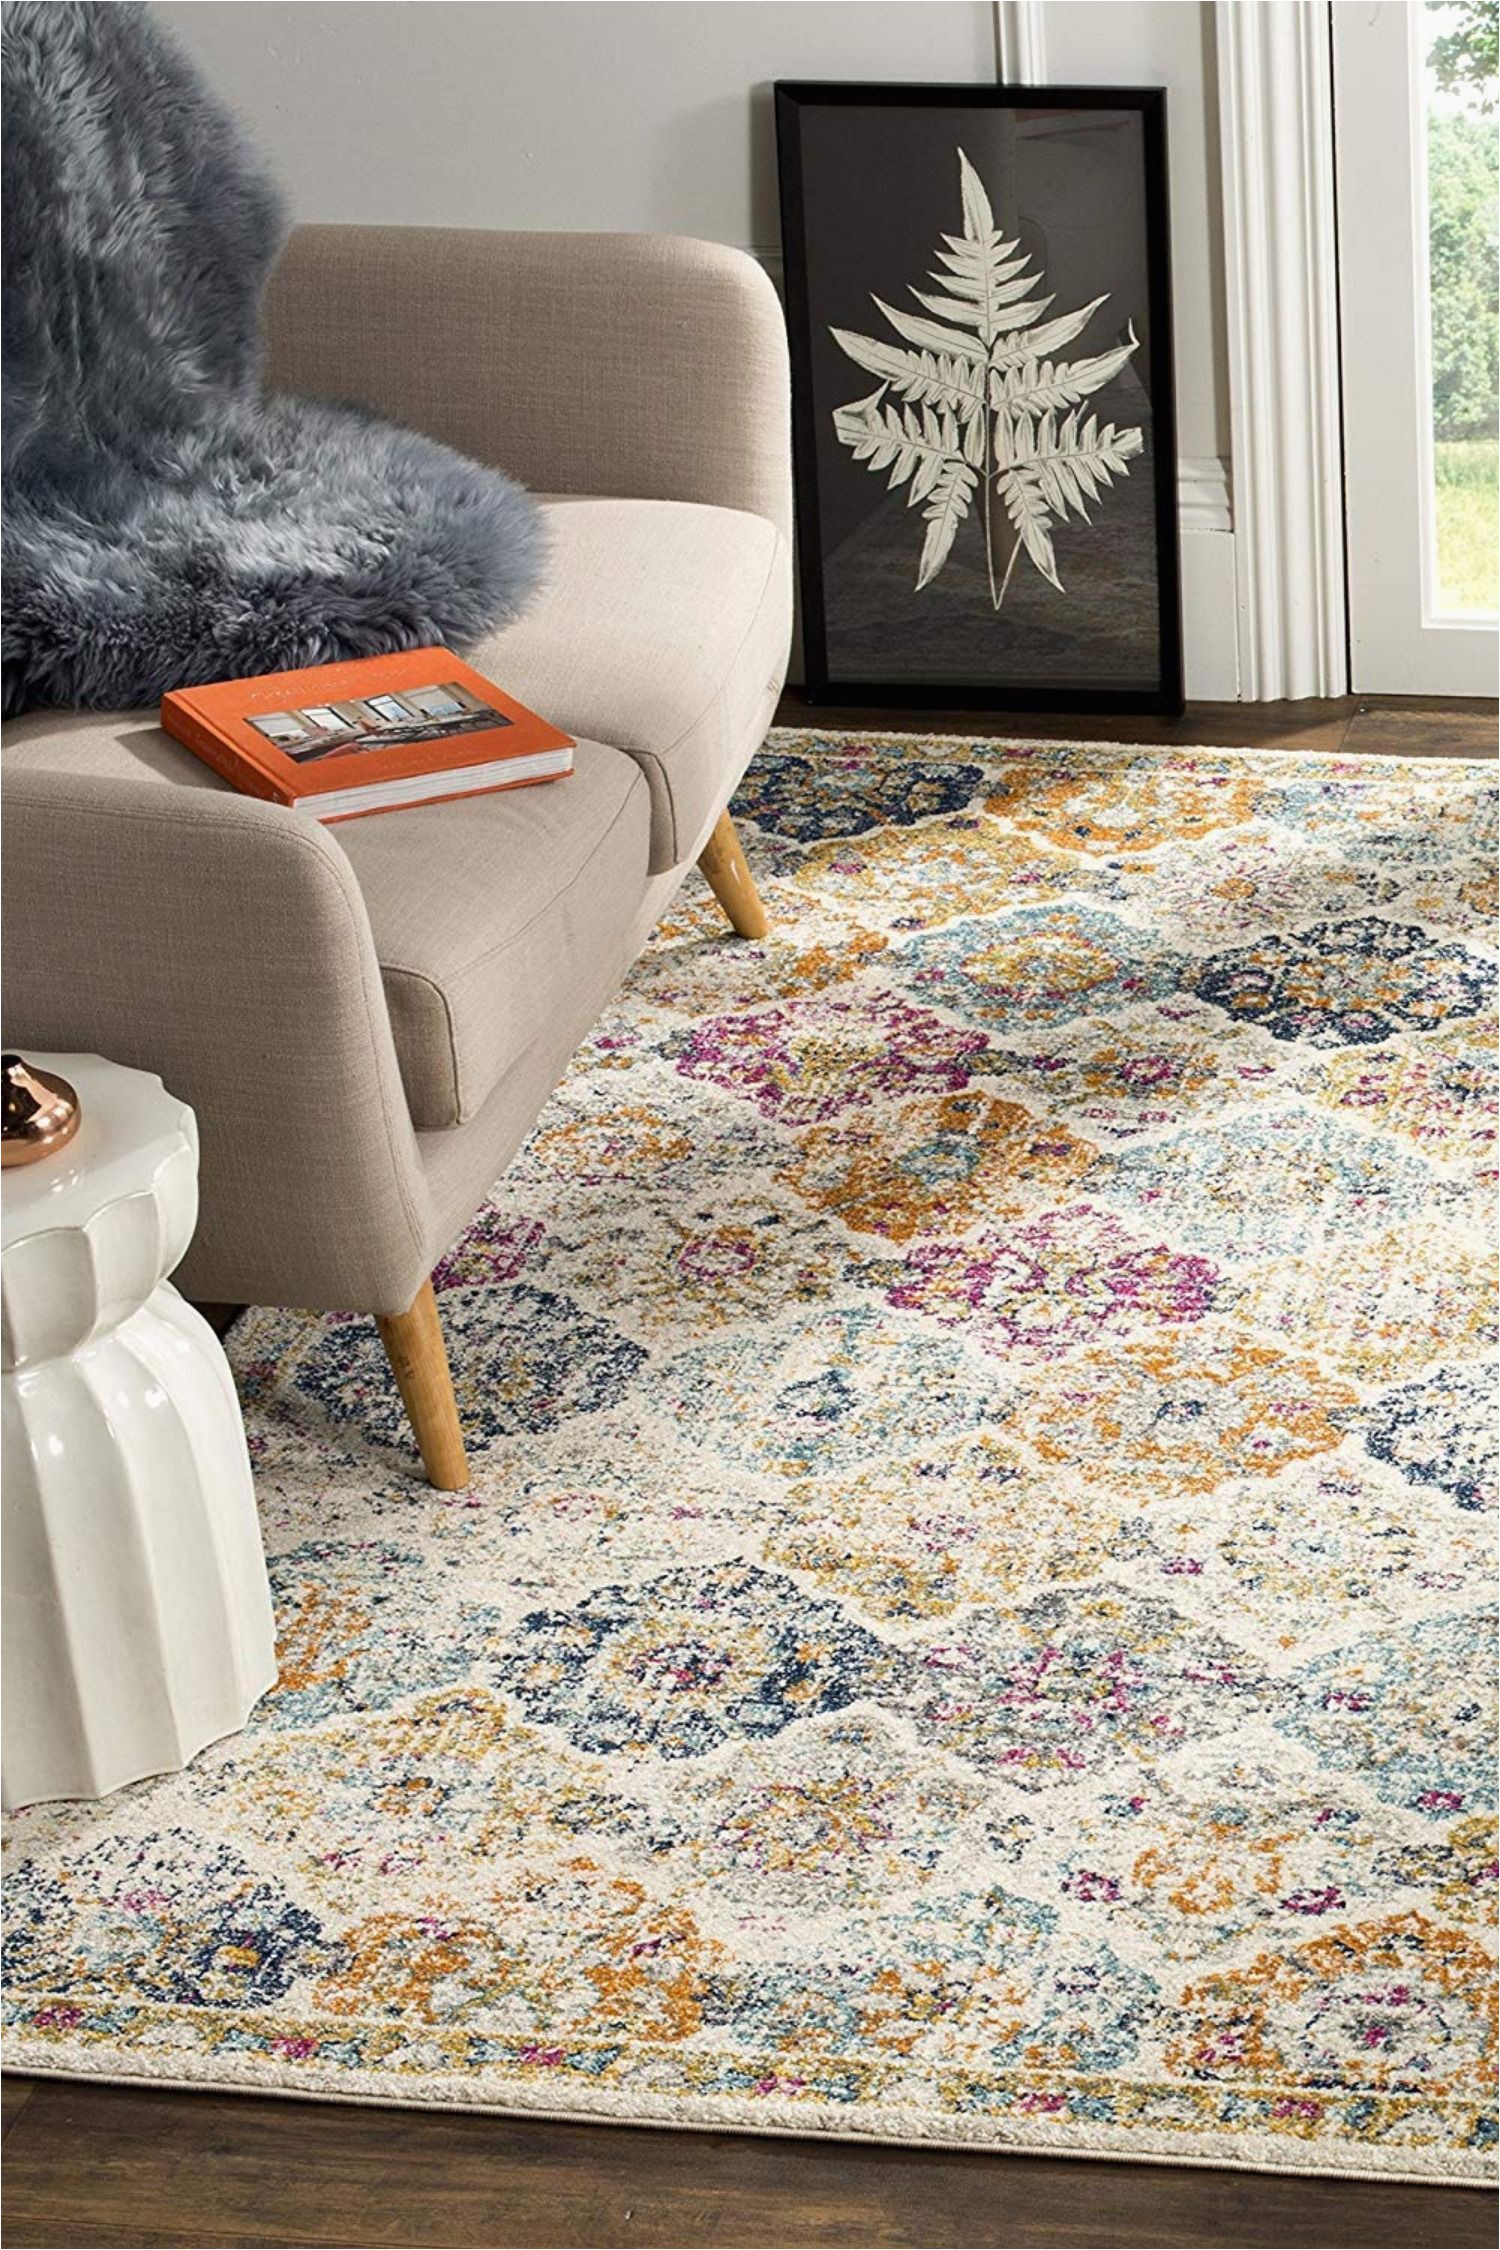 20 by 20 area Rug 20 area Rug Design Ideas for Your Lovely Home